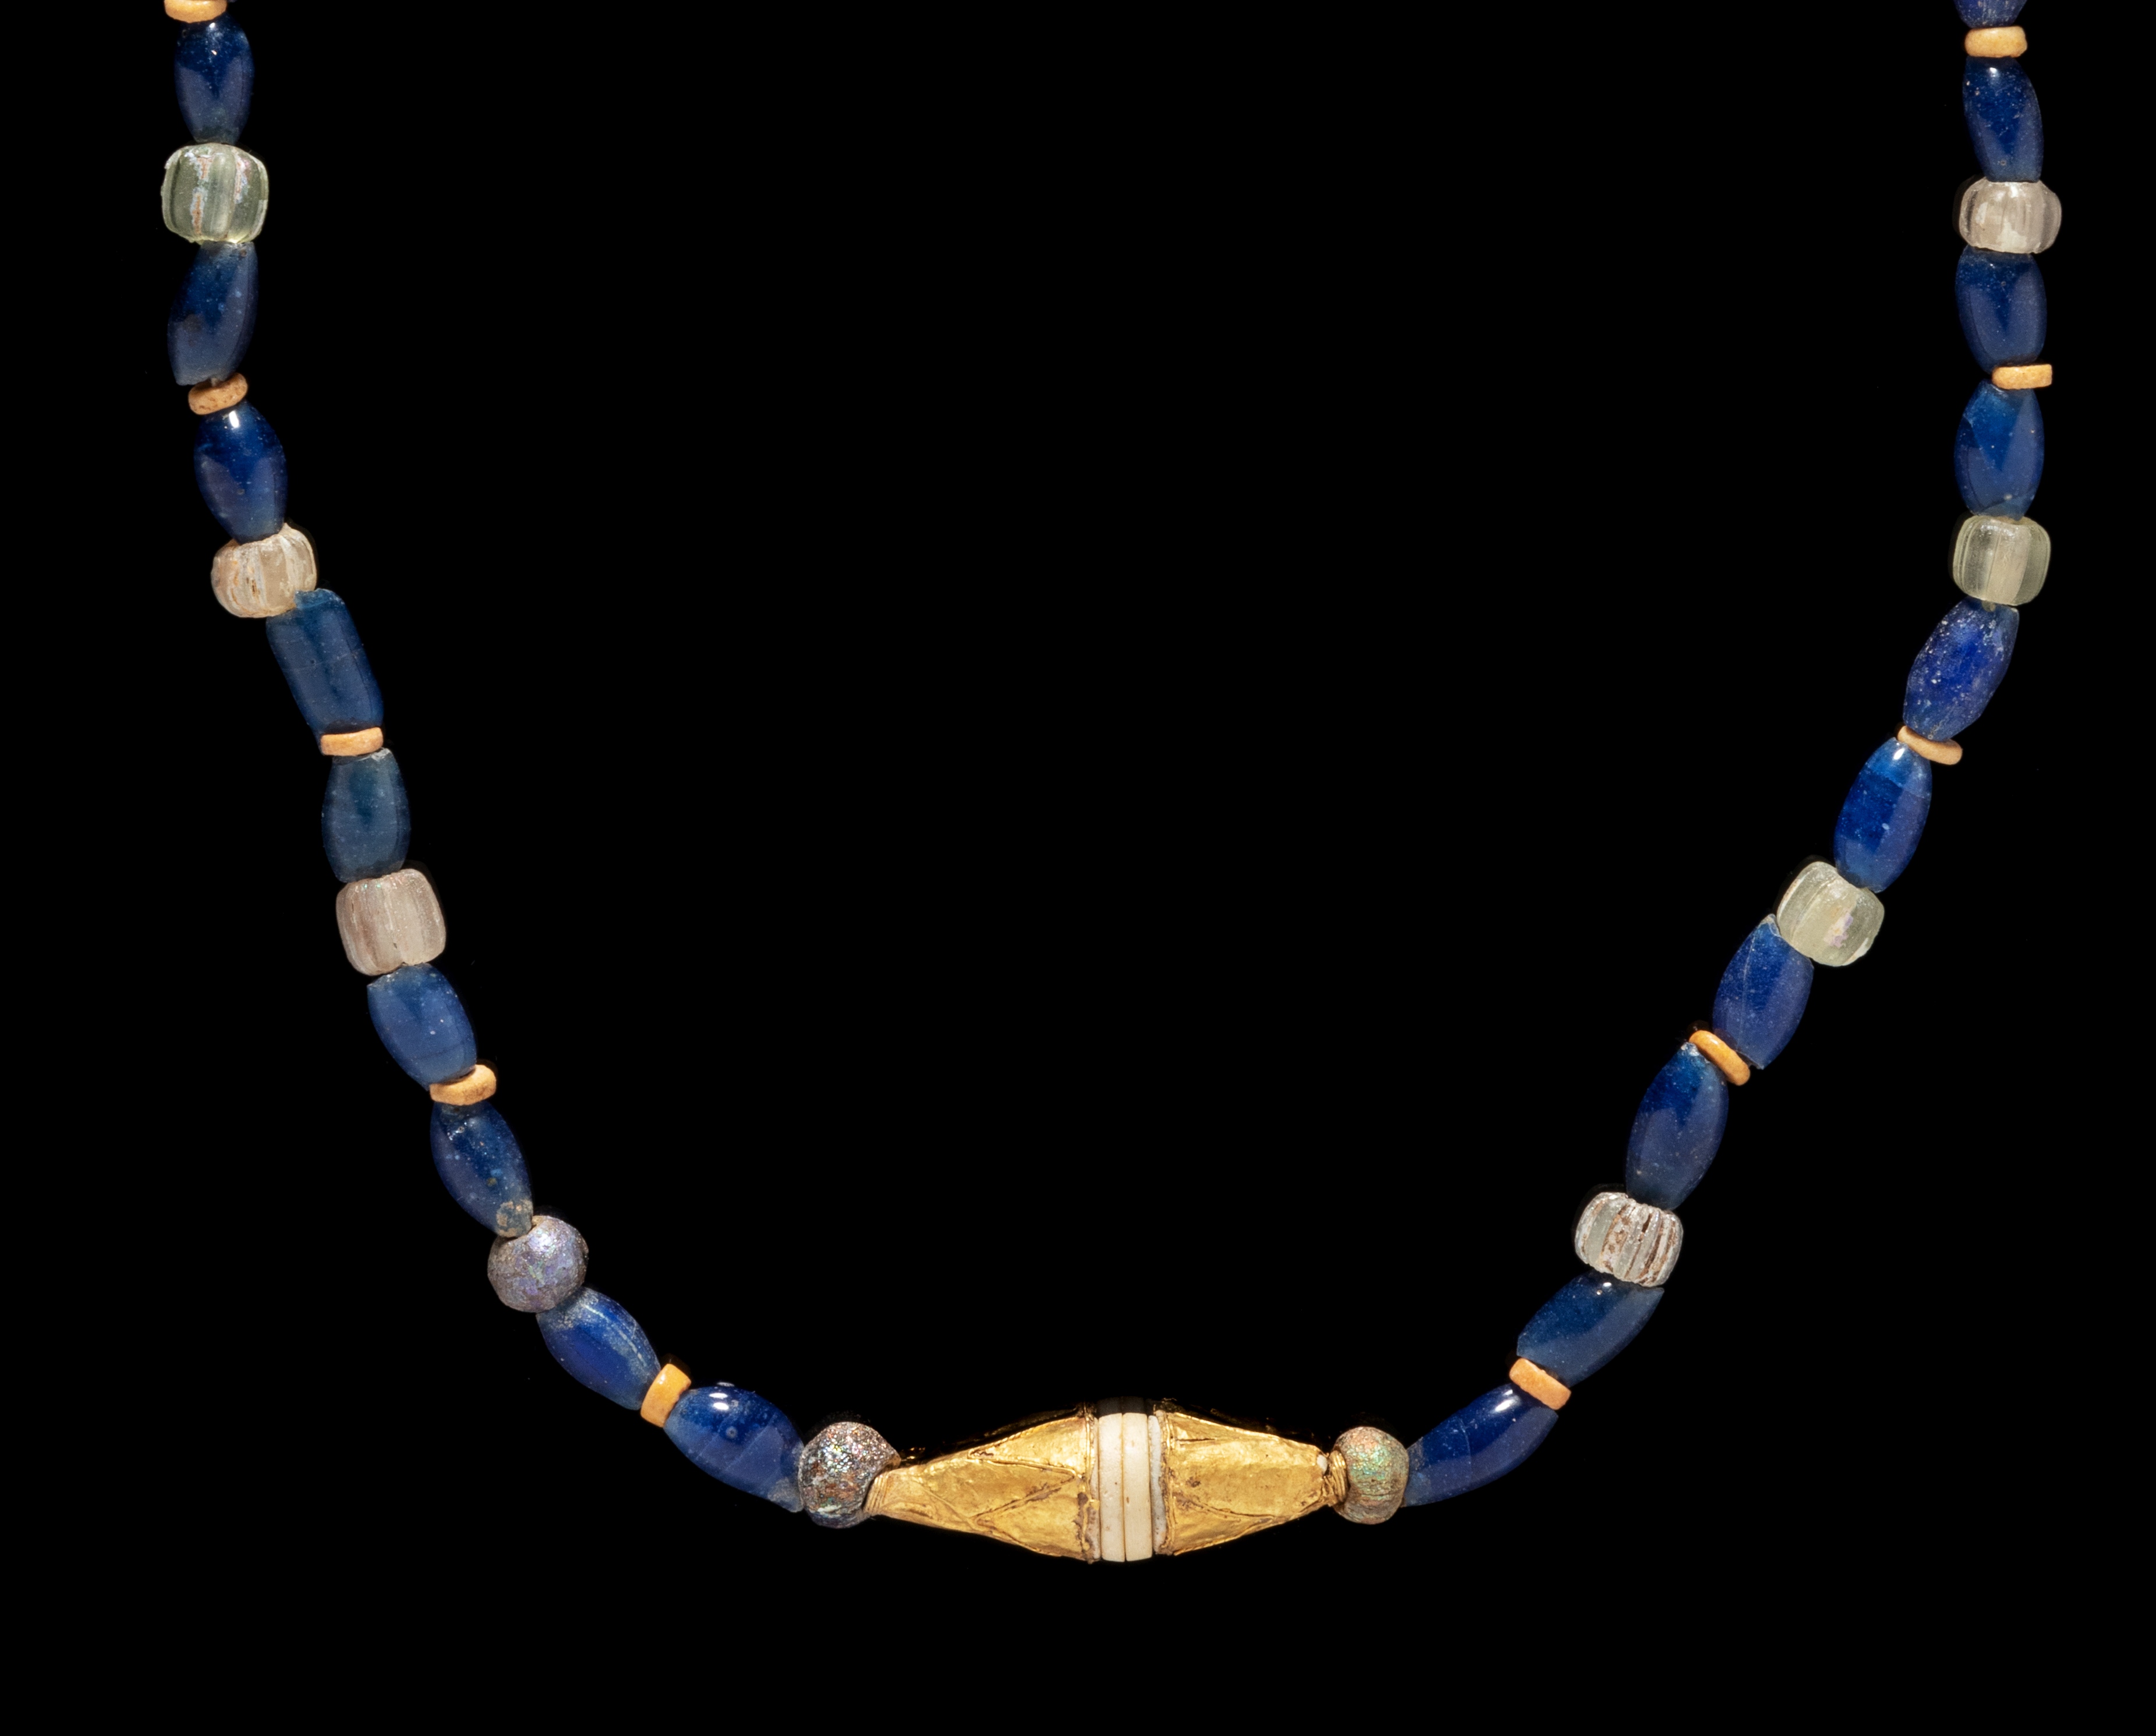 A Roman Gold and Glass Bead Necklace  Length 19 13/16 inches (25 cm). - Image 4 of 6